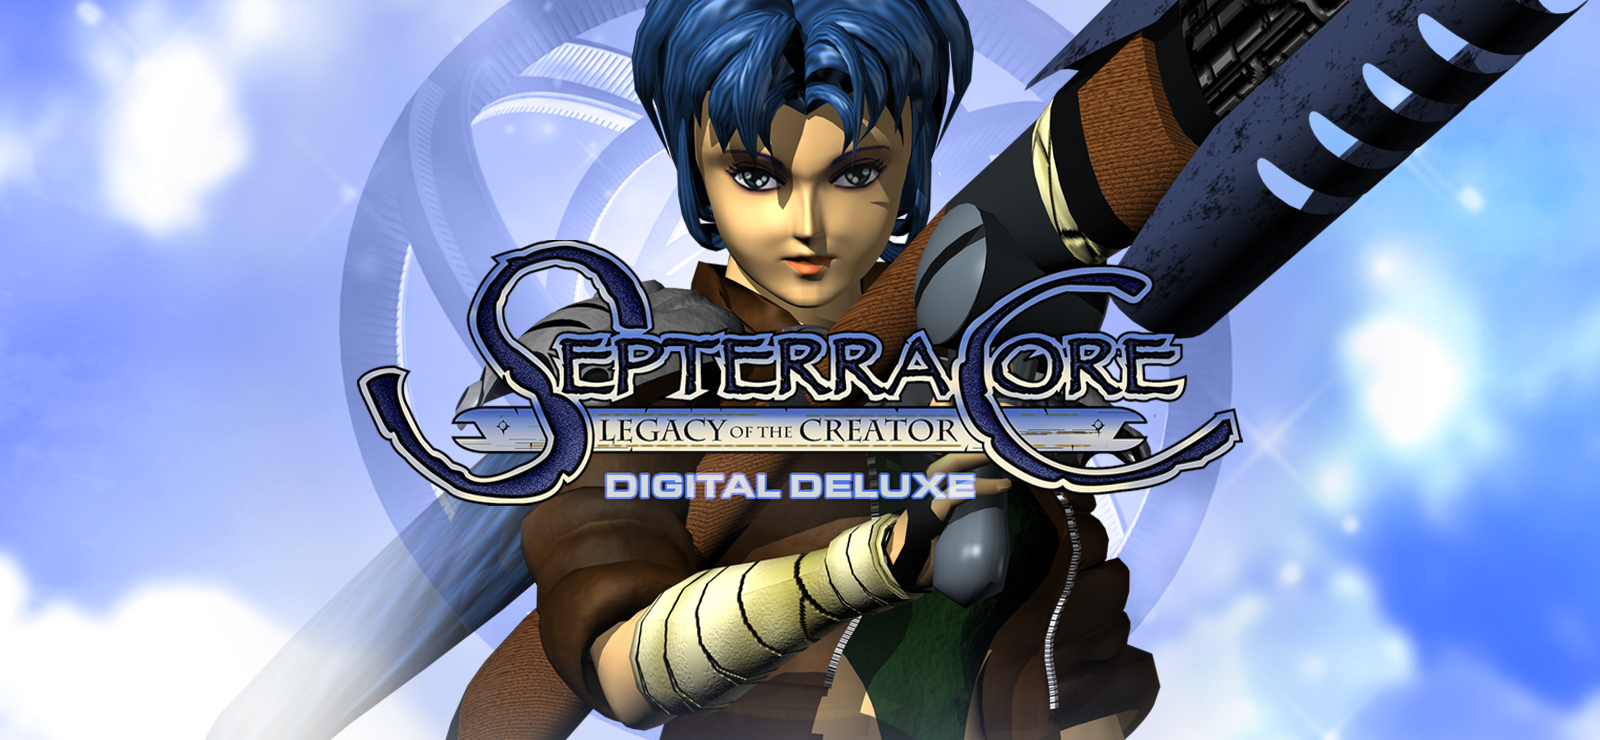 Septerra Core: Legacy Of The Creator - Digital Deluxe Content